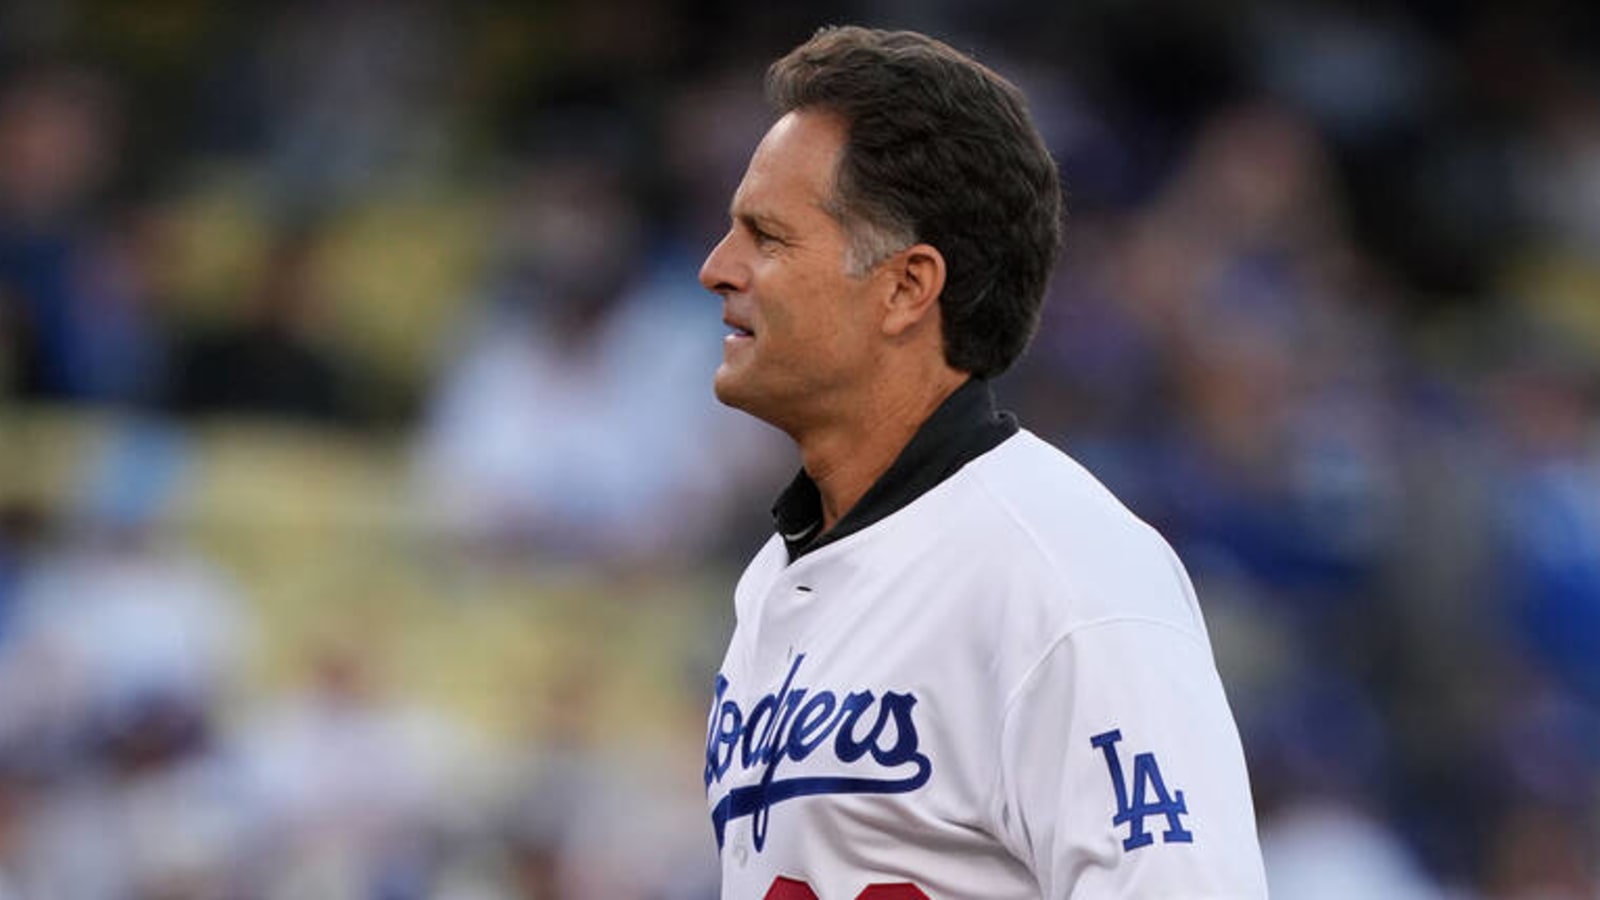 Watch: Eric Karros calls son's strikeout during game